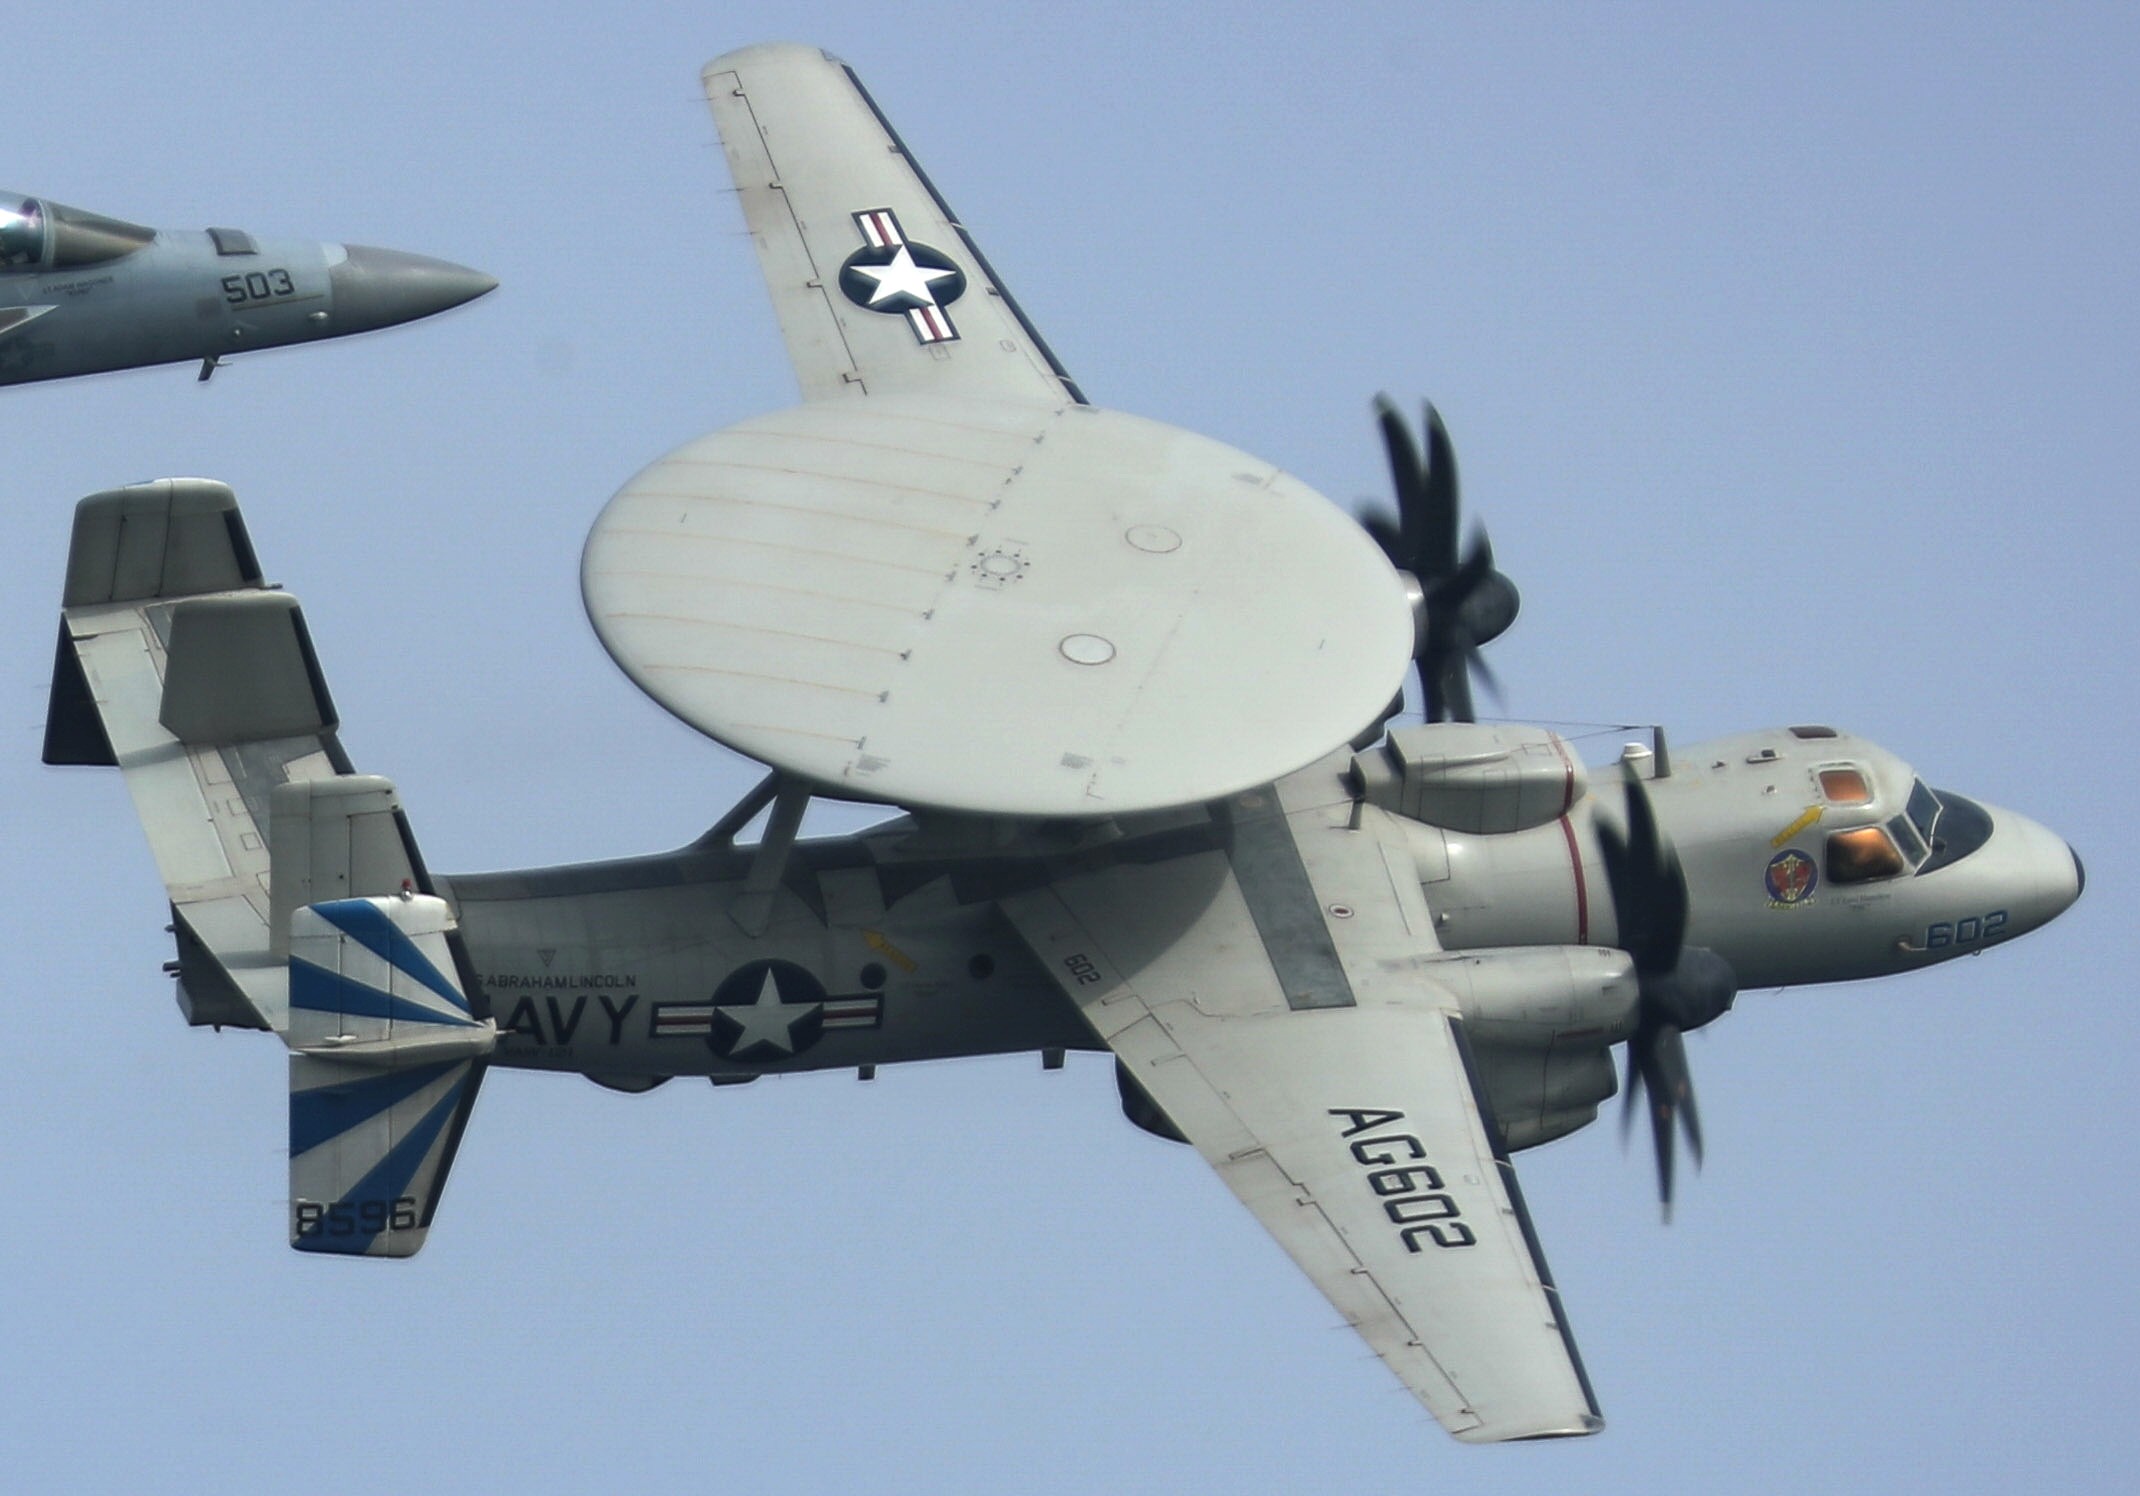 vaw-121 bluetails airborne command and control squadron us navy e-2d advanced hawkeye cvw-7 uss abraham lincoln cvn-72 74